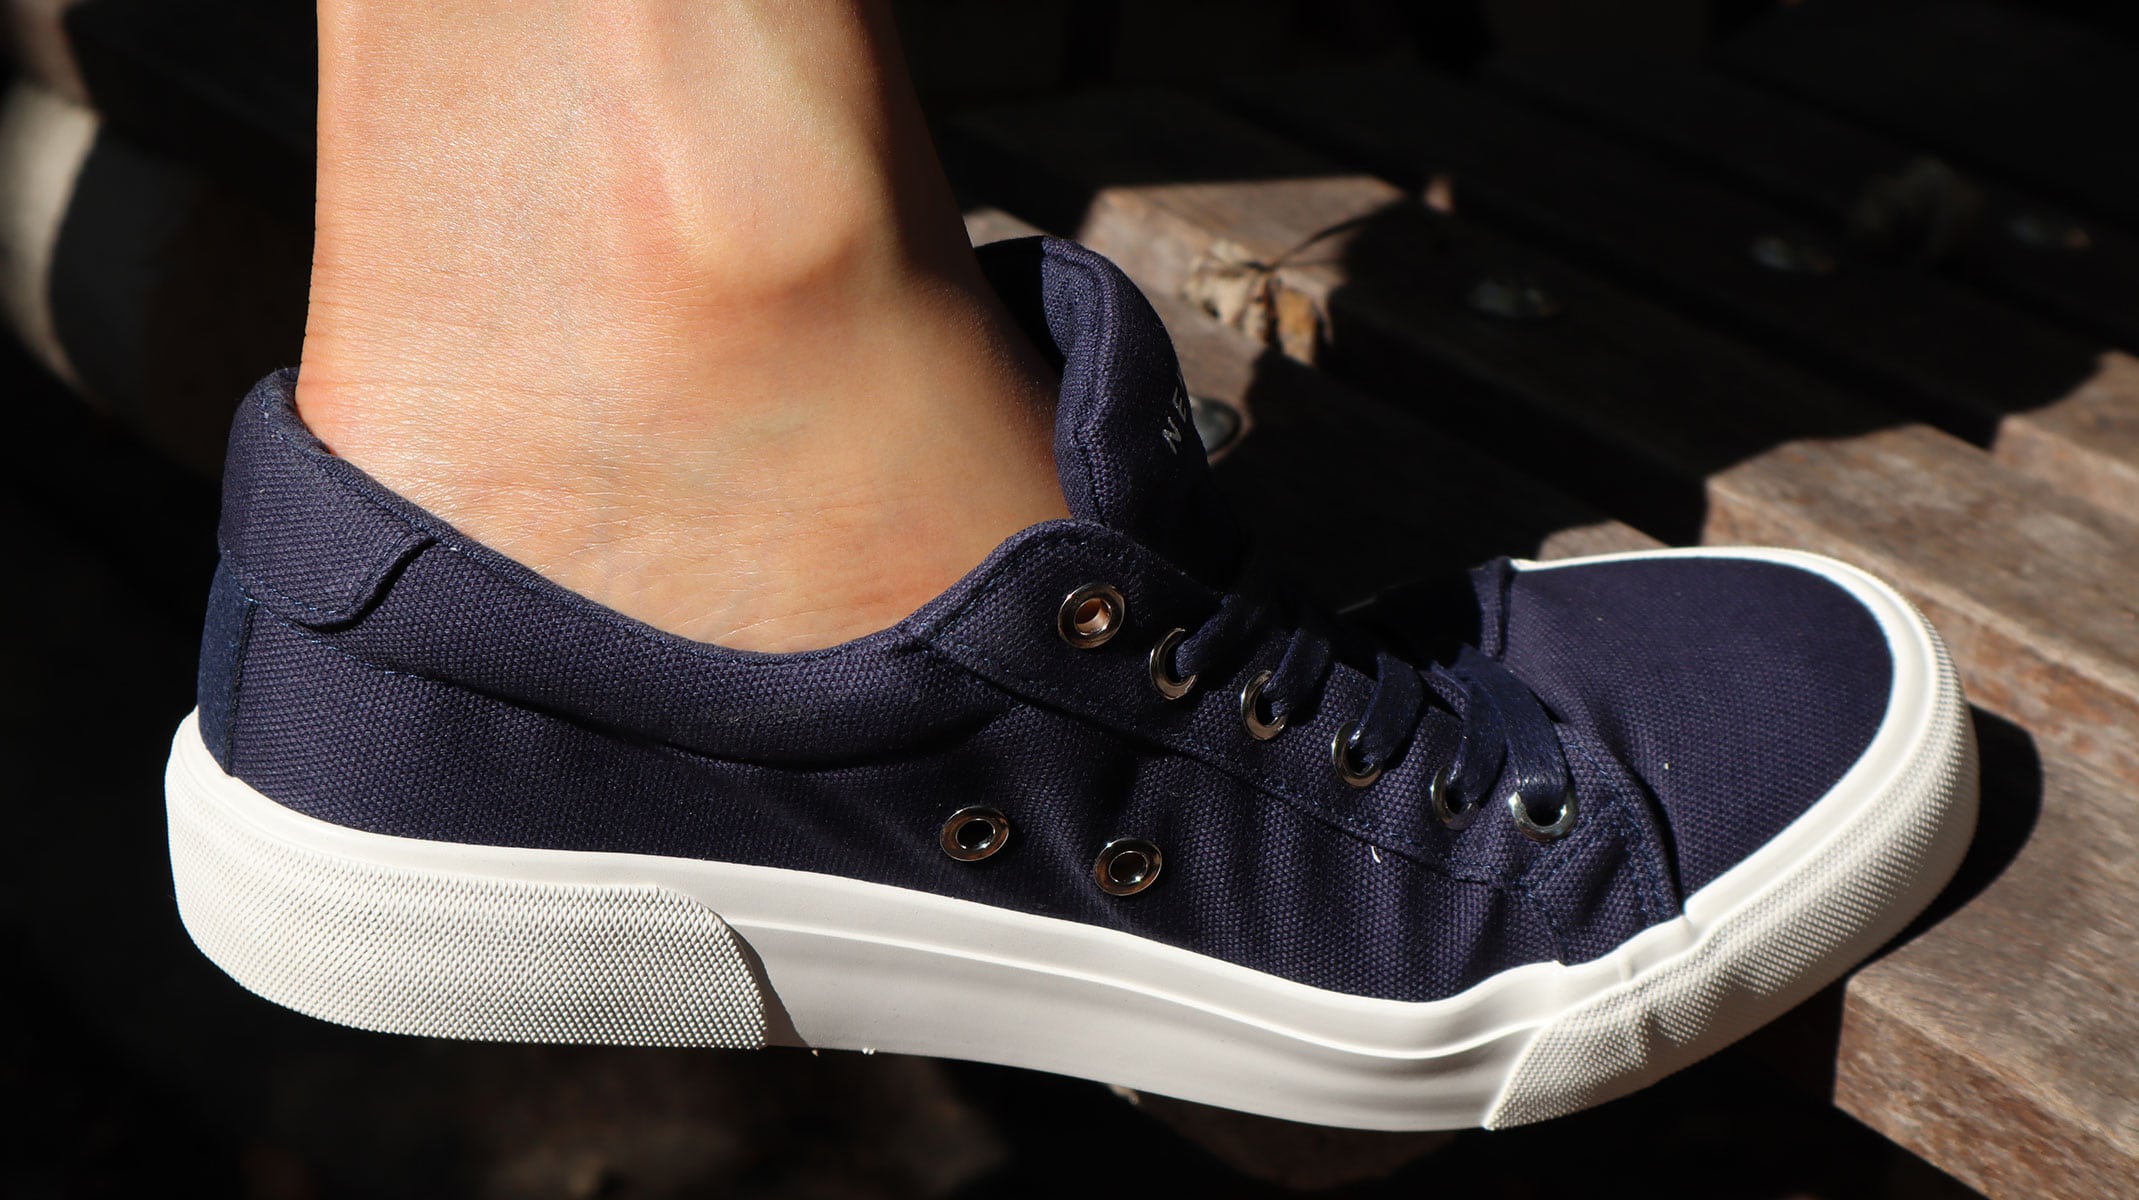 New Republic Bowery Canvas Sneakers side view